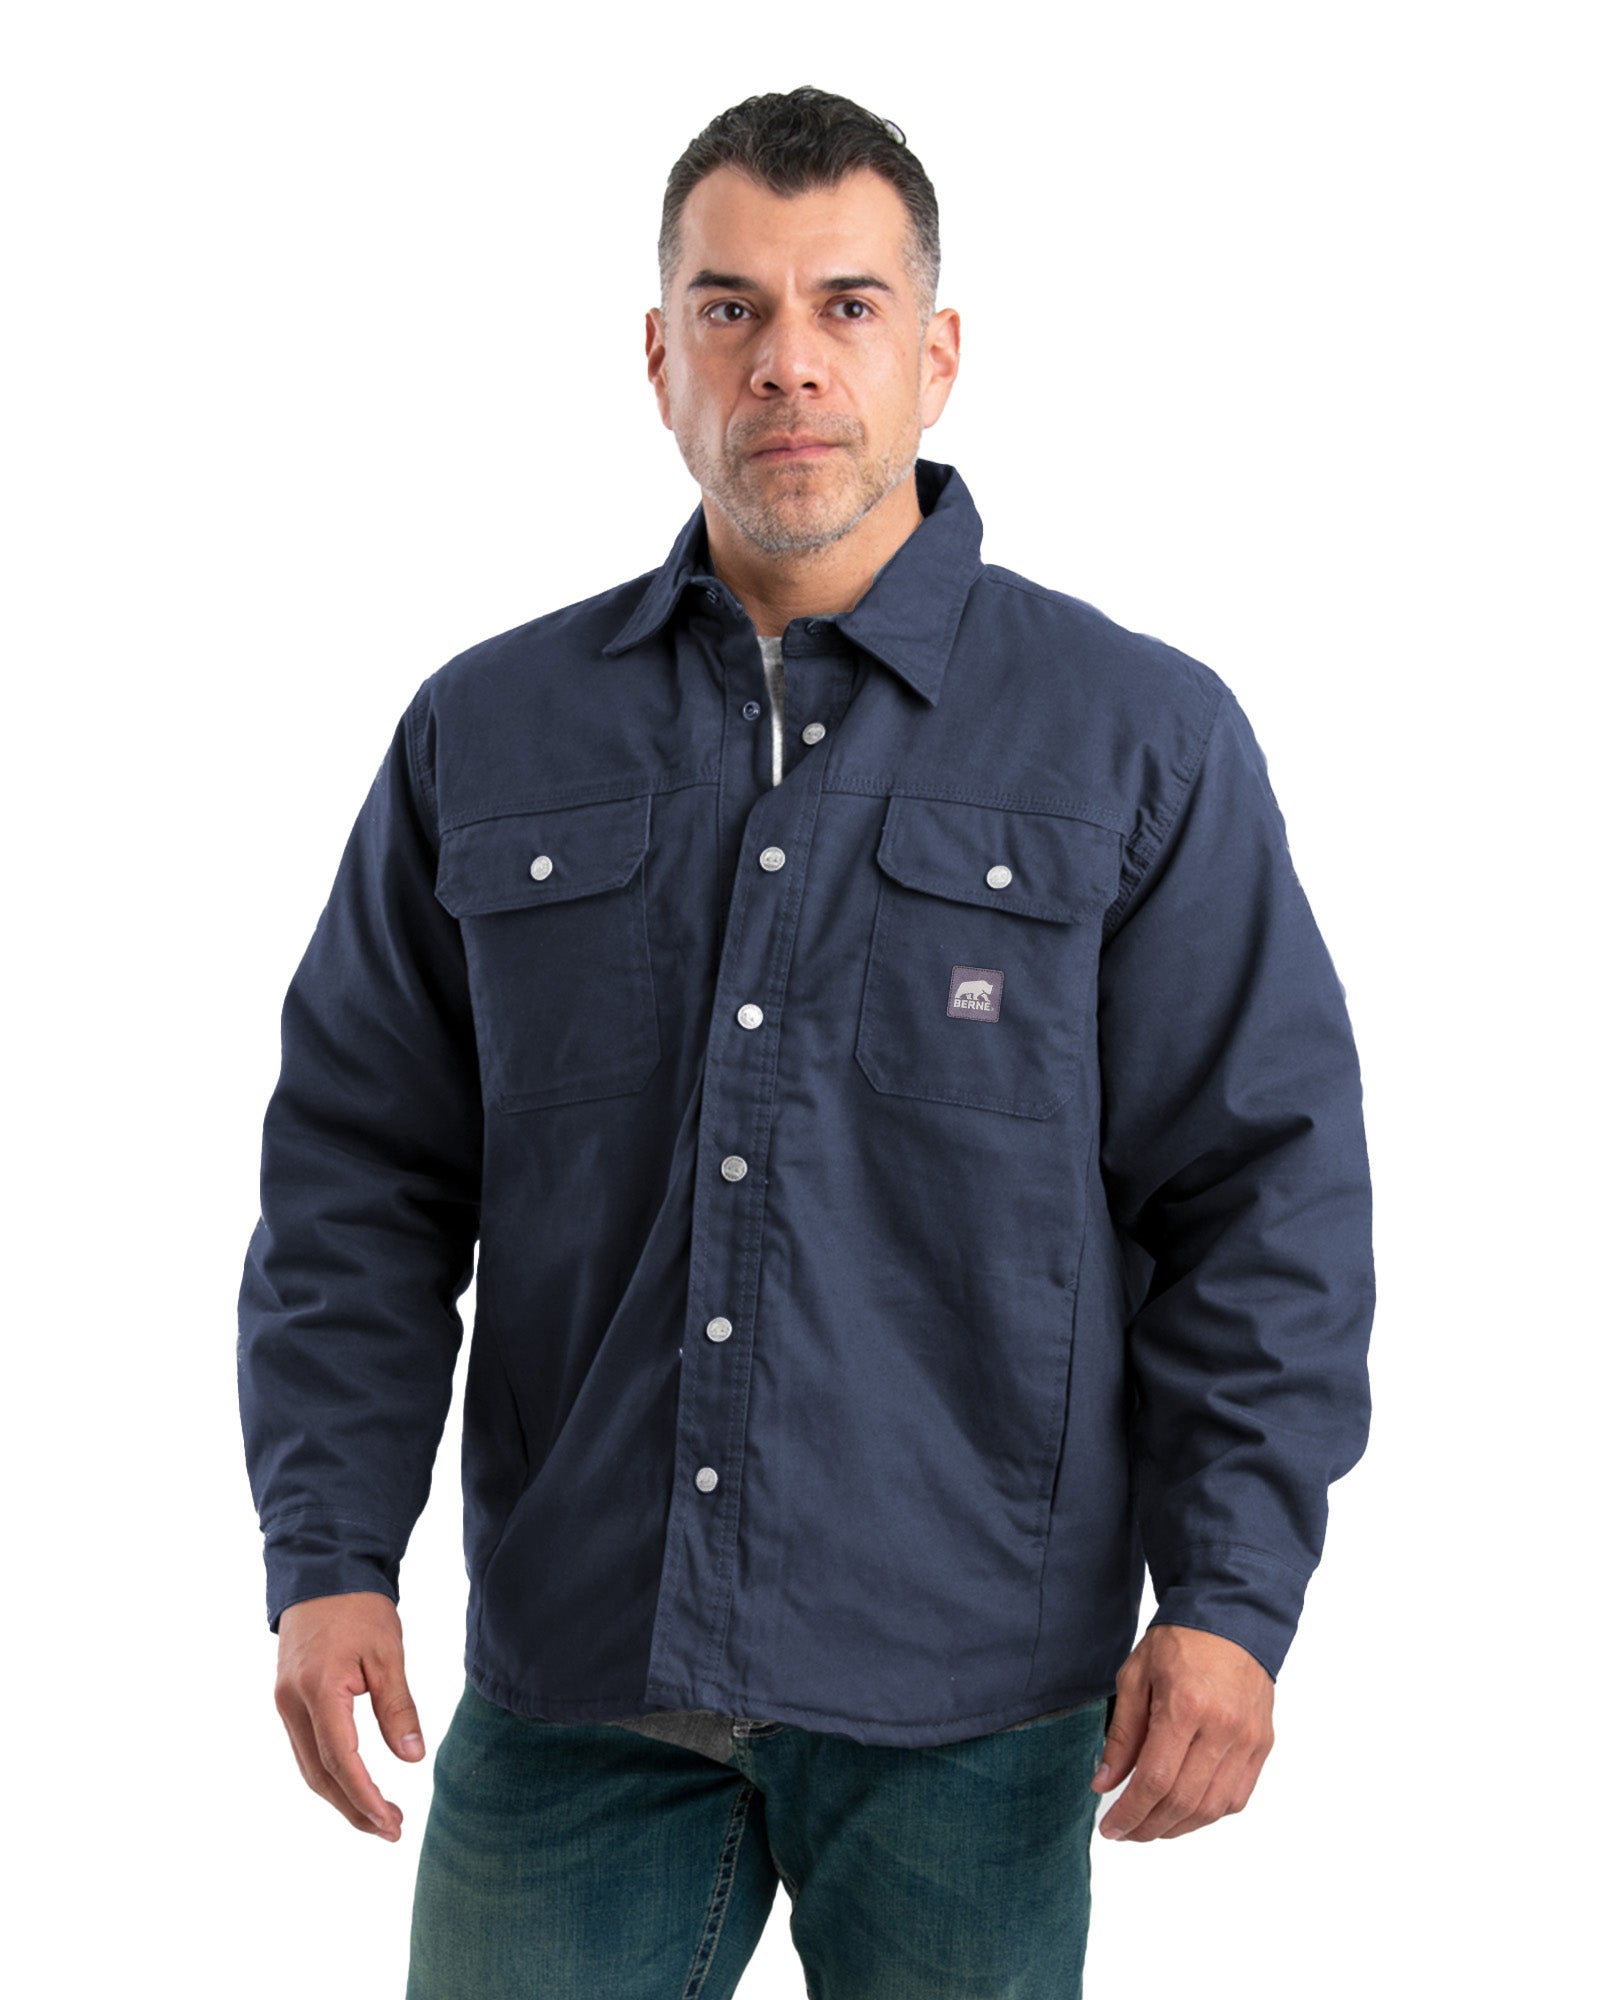 Men's Duck Shirt Jacket for Cold-Weather Work